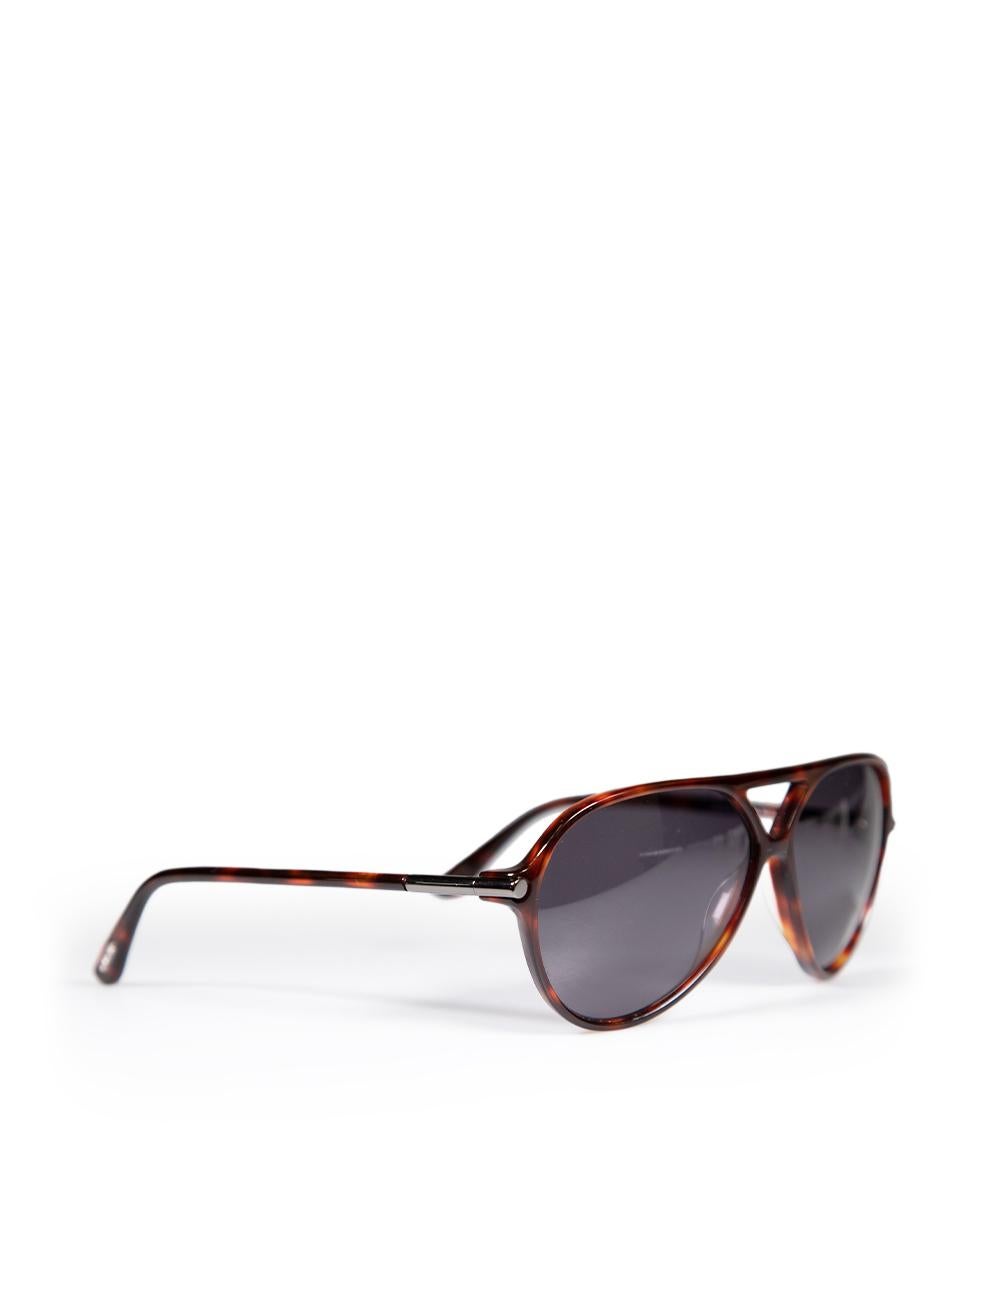 Tom Ford Red Havana Tortoiseshell Leopold Sunglasses In New Condition For Sale In London, GB